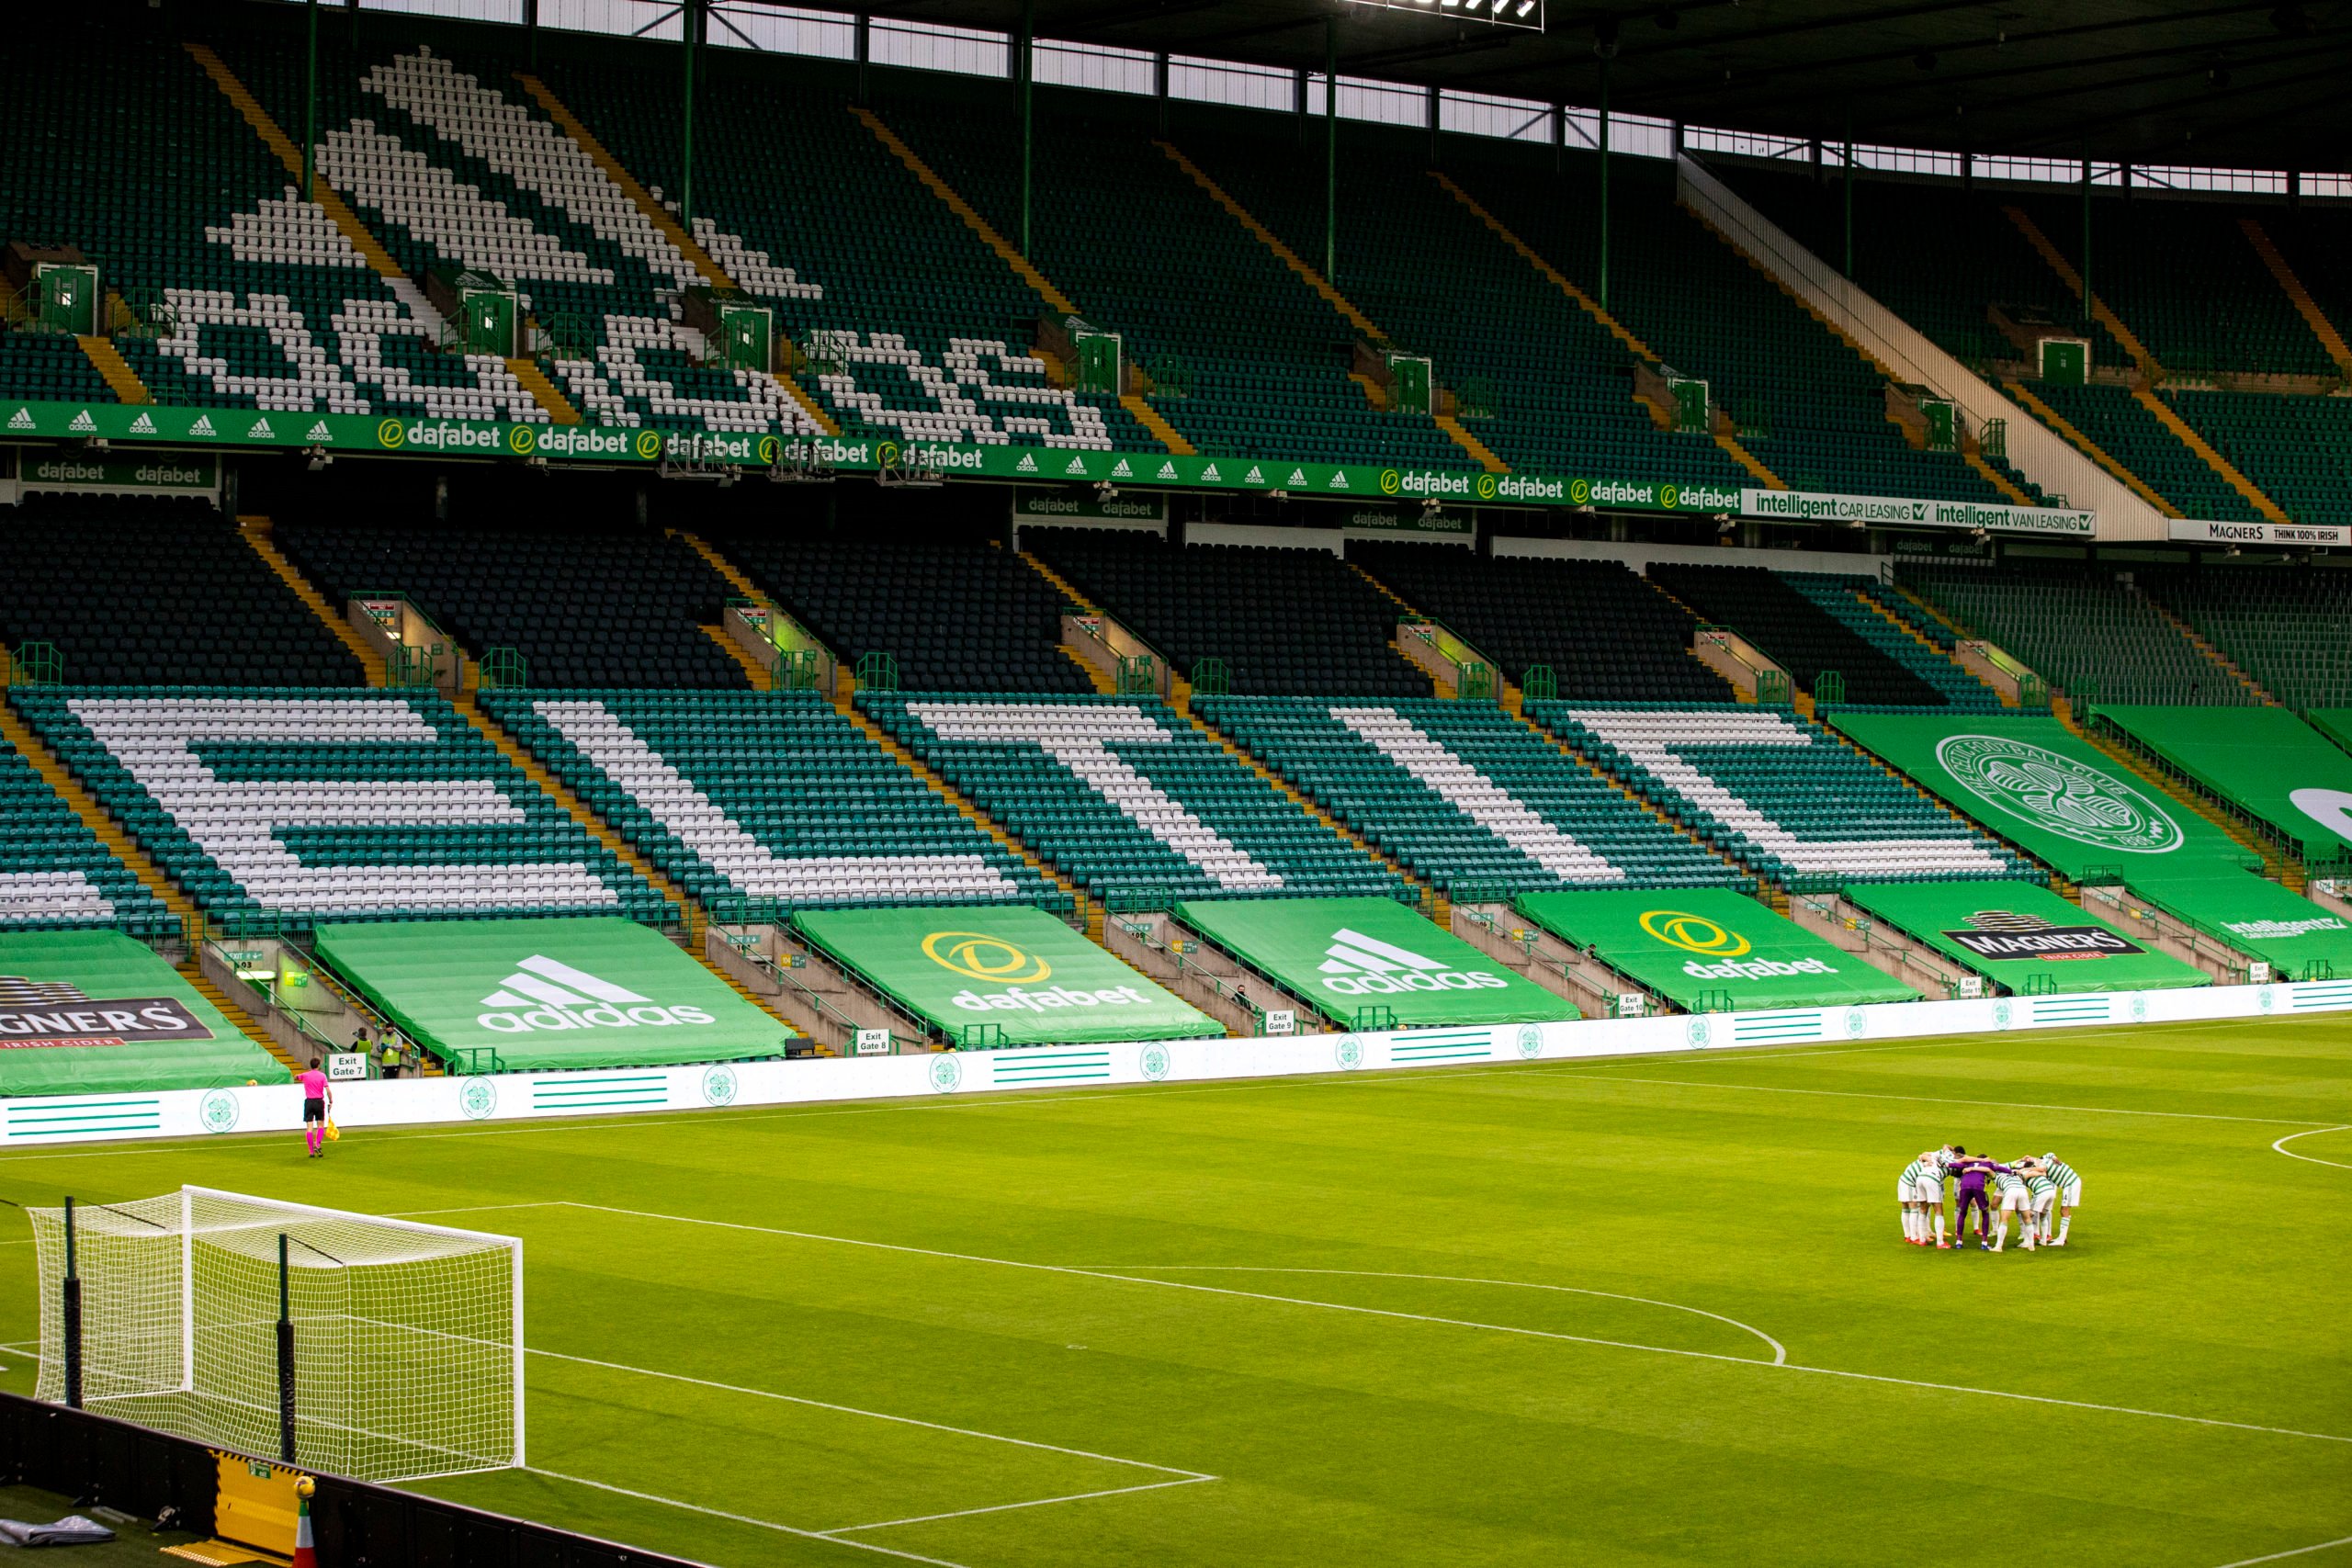 Celtic again deny local press to cover match; Killie Standard barred